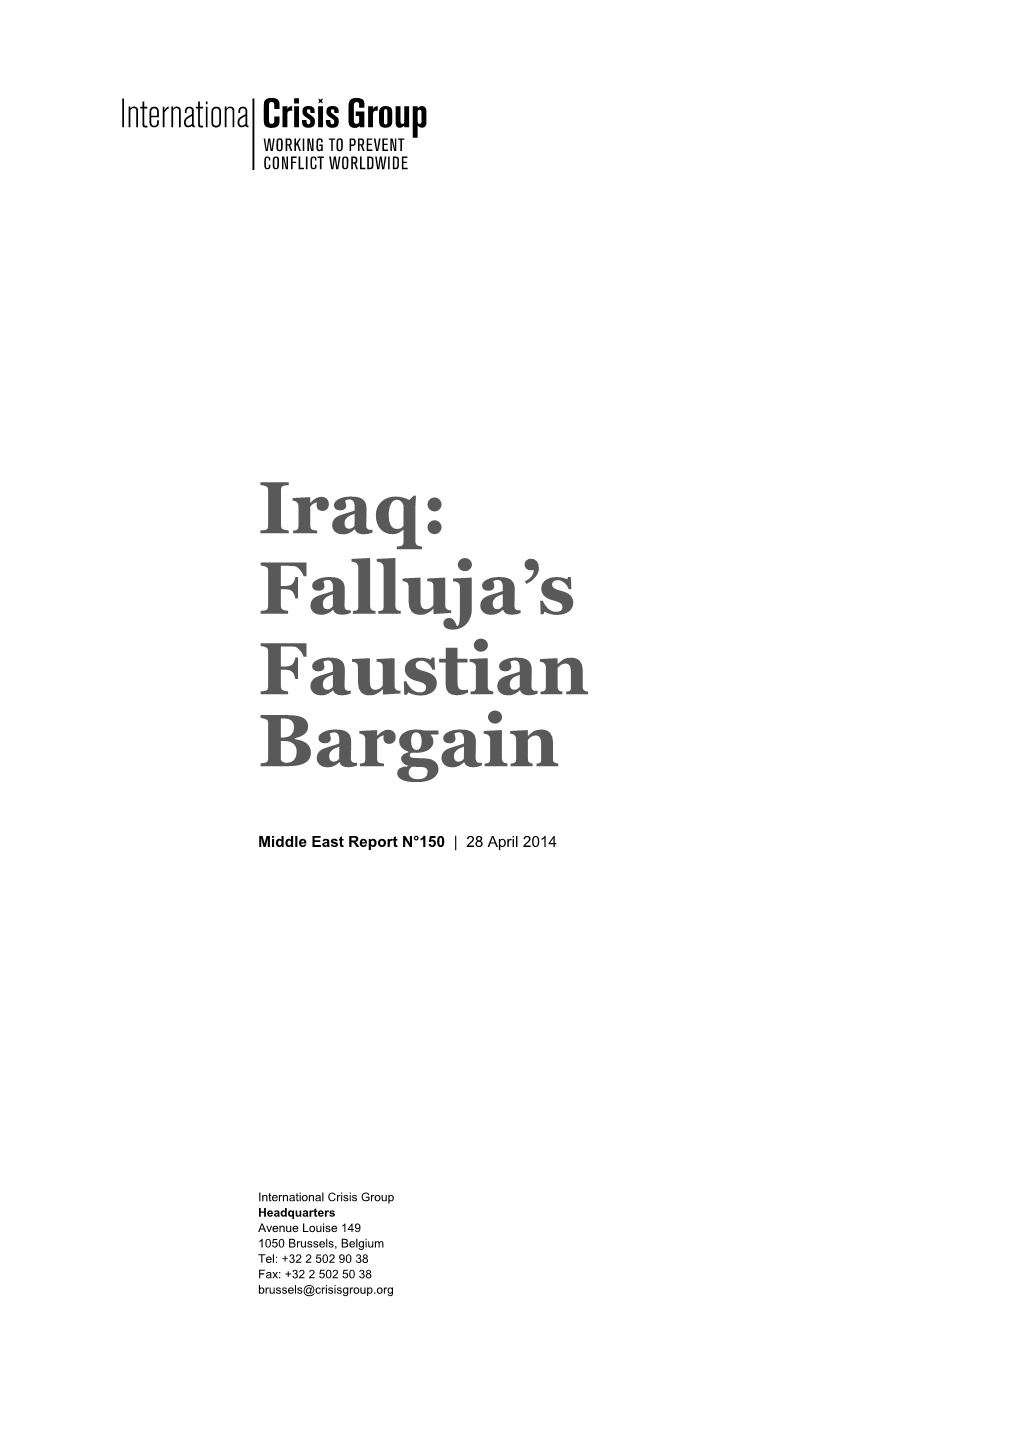 Iraq: Falluja's Faustian Bargain Crisis Group Middle East Report N°150, 28 April 2014 Page Ii